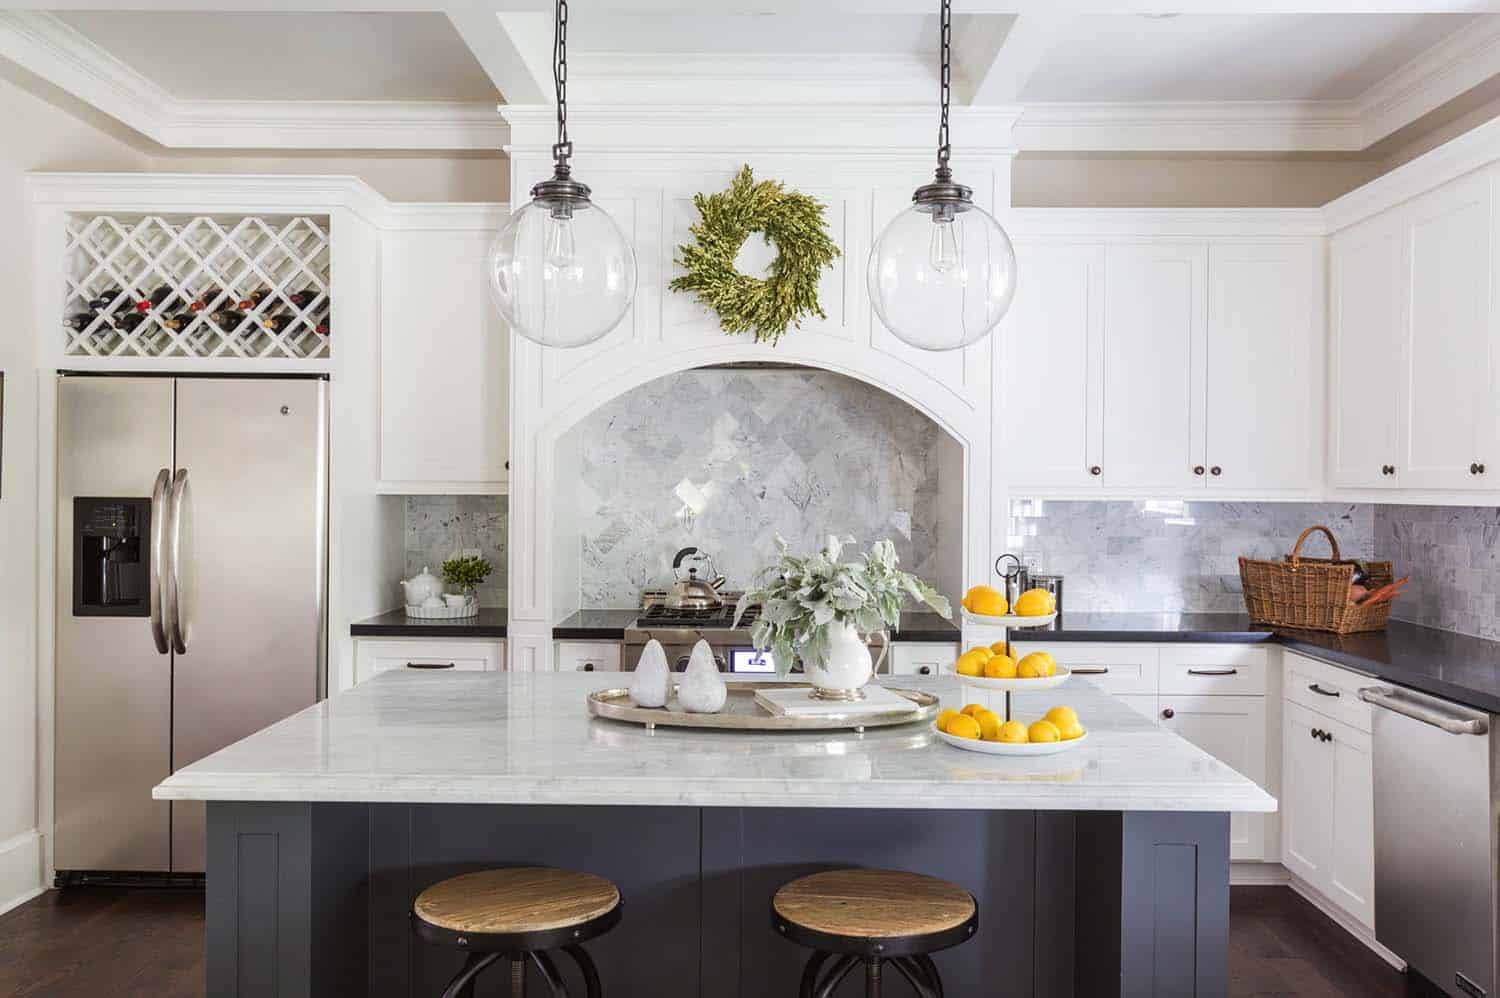 Historic Craftsman-style bungalow gets stunning makeover in Houston